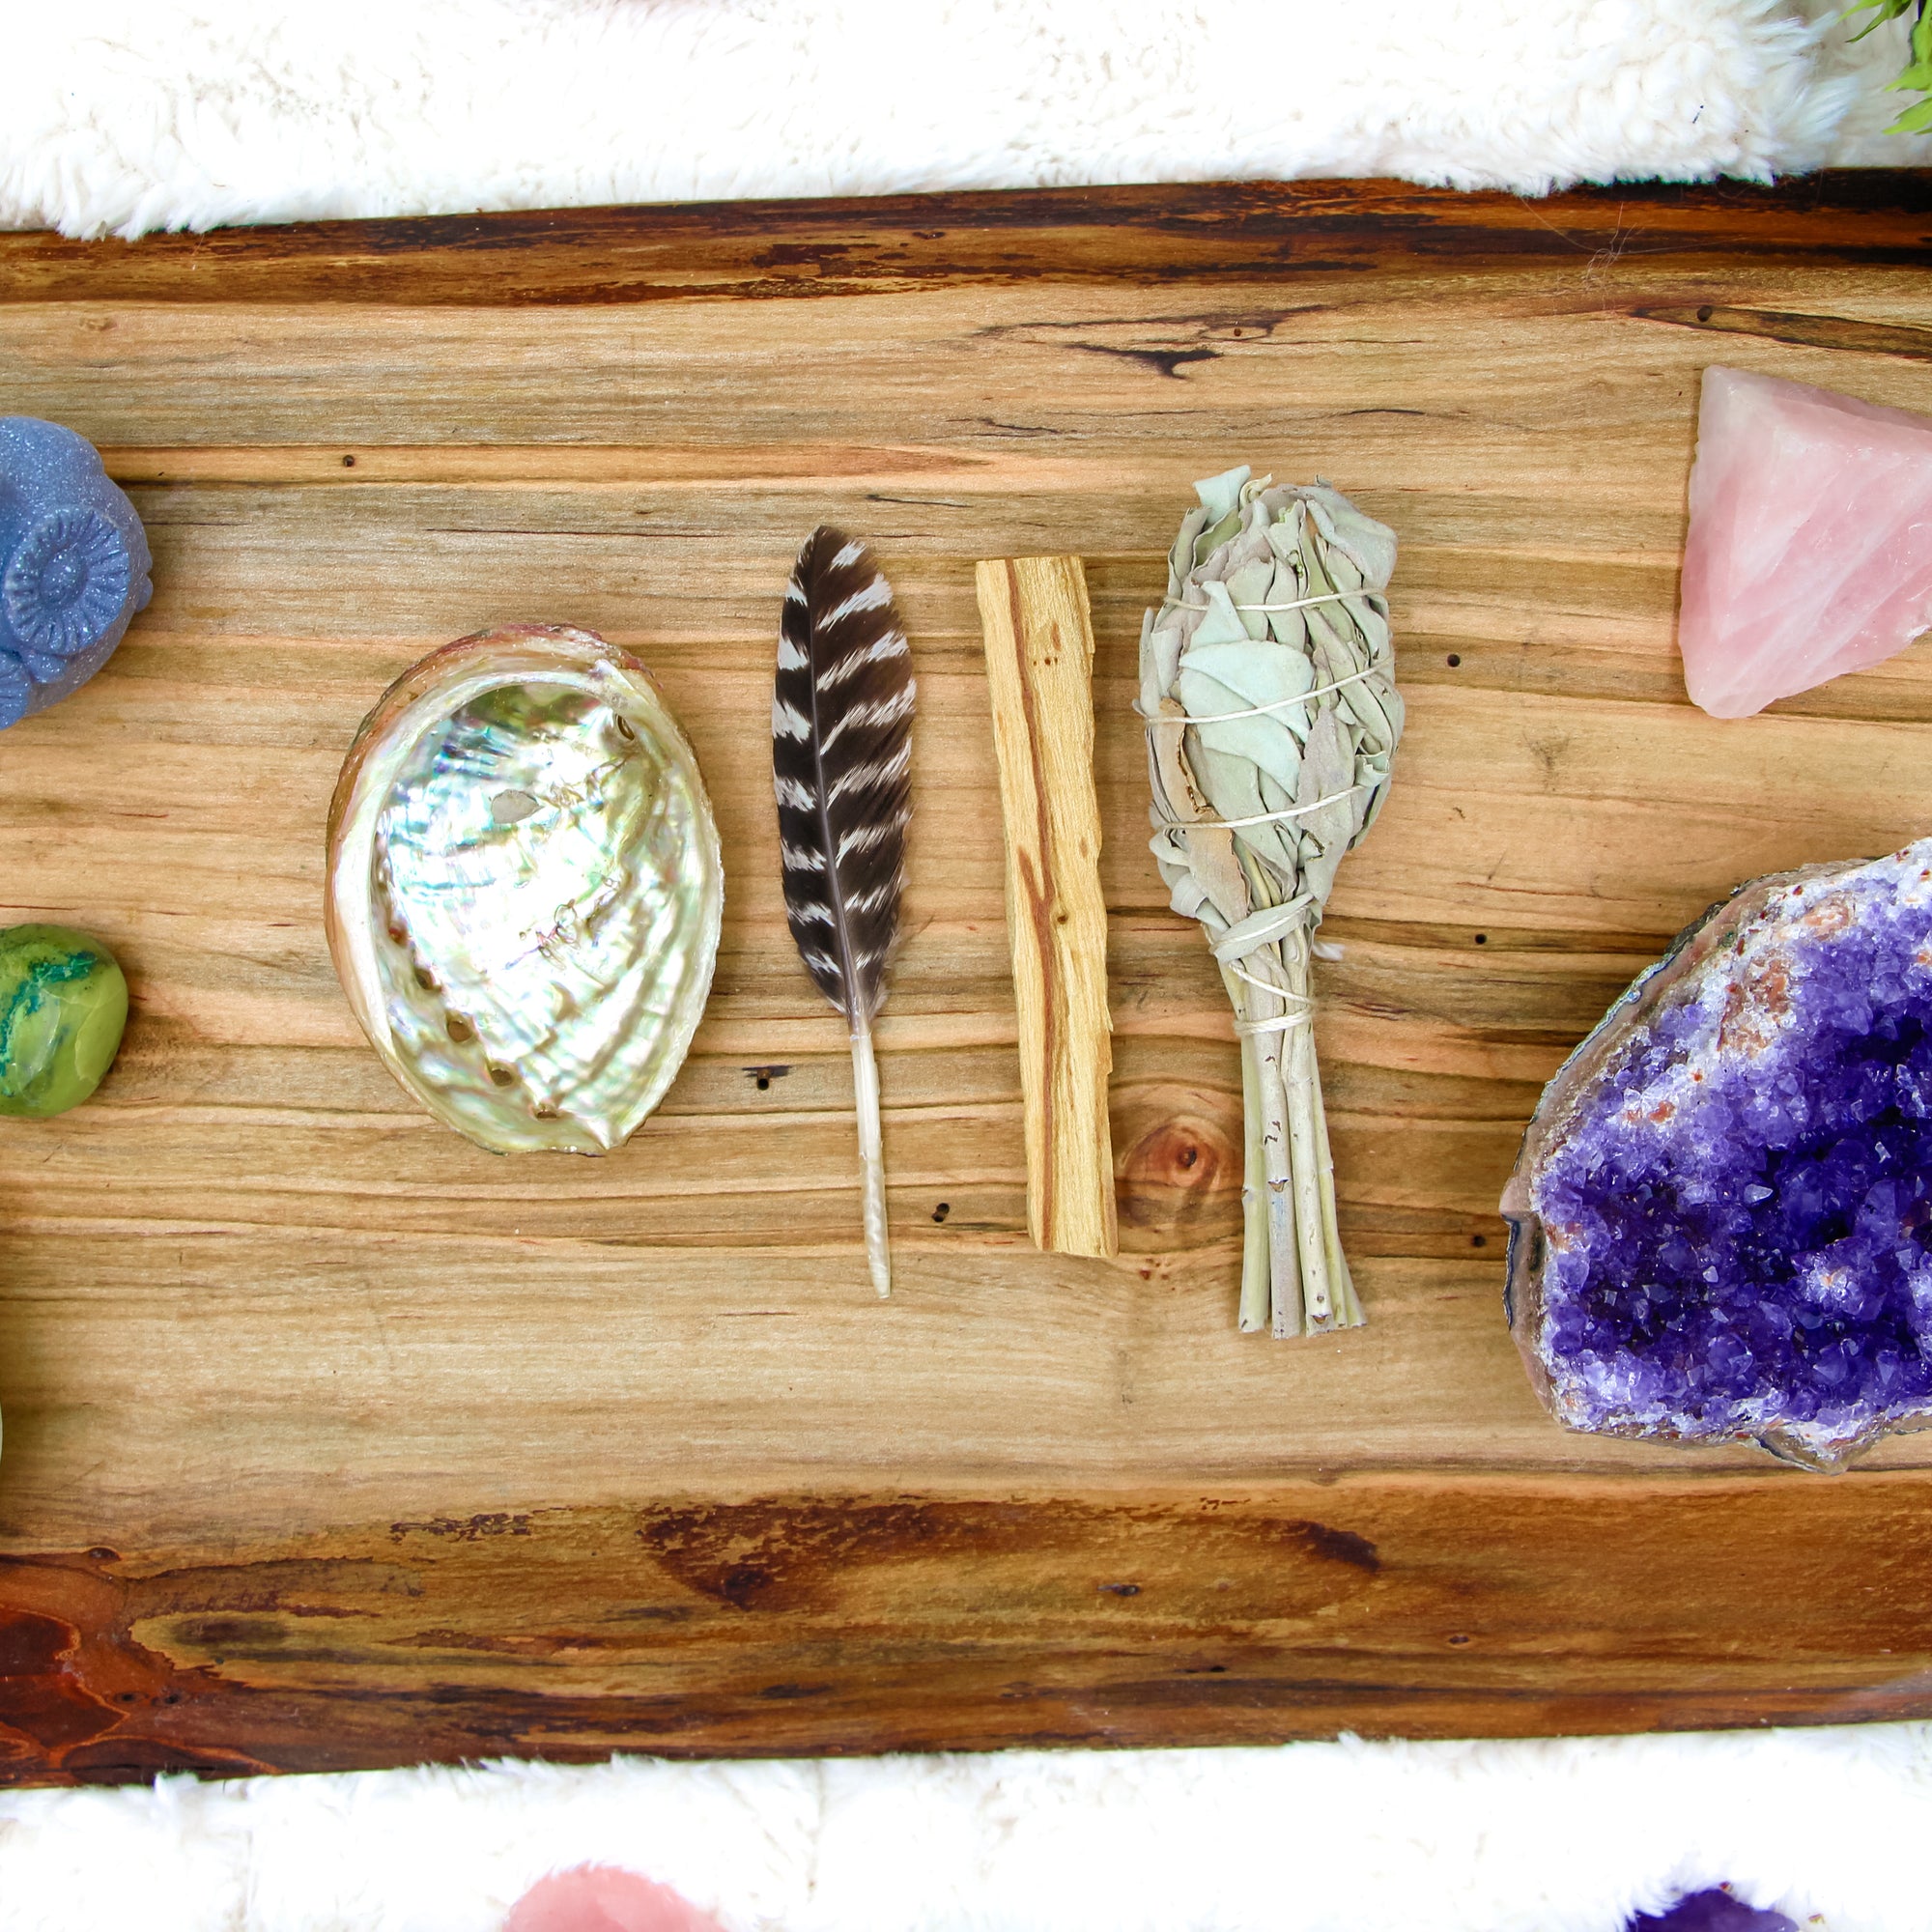 smudging kit, sage bundle, smudge kit, smudge set, beginners smudge, how to smudge, what do I need to smudge, tools for smudging, space clearing, energy clearing, 